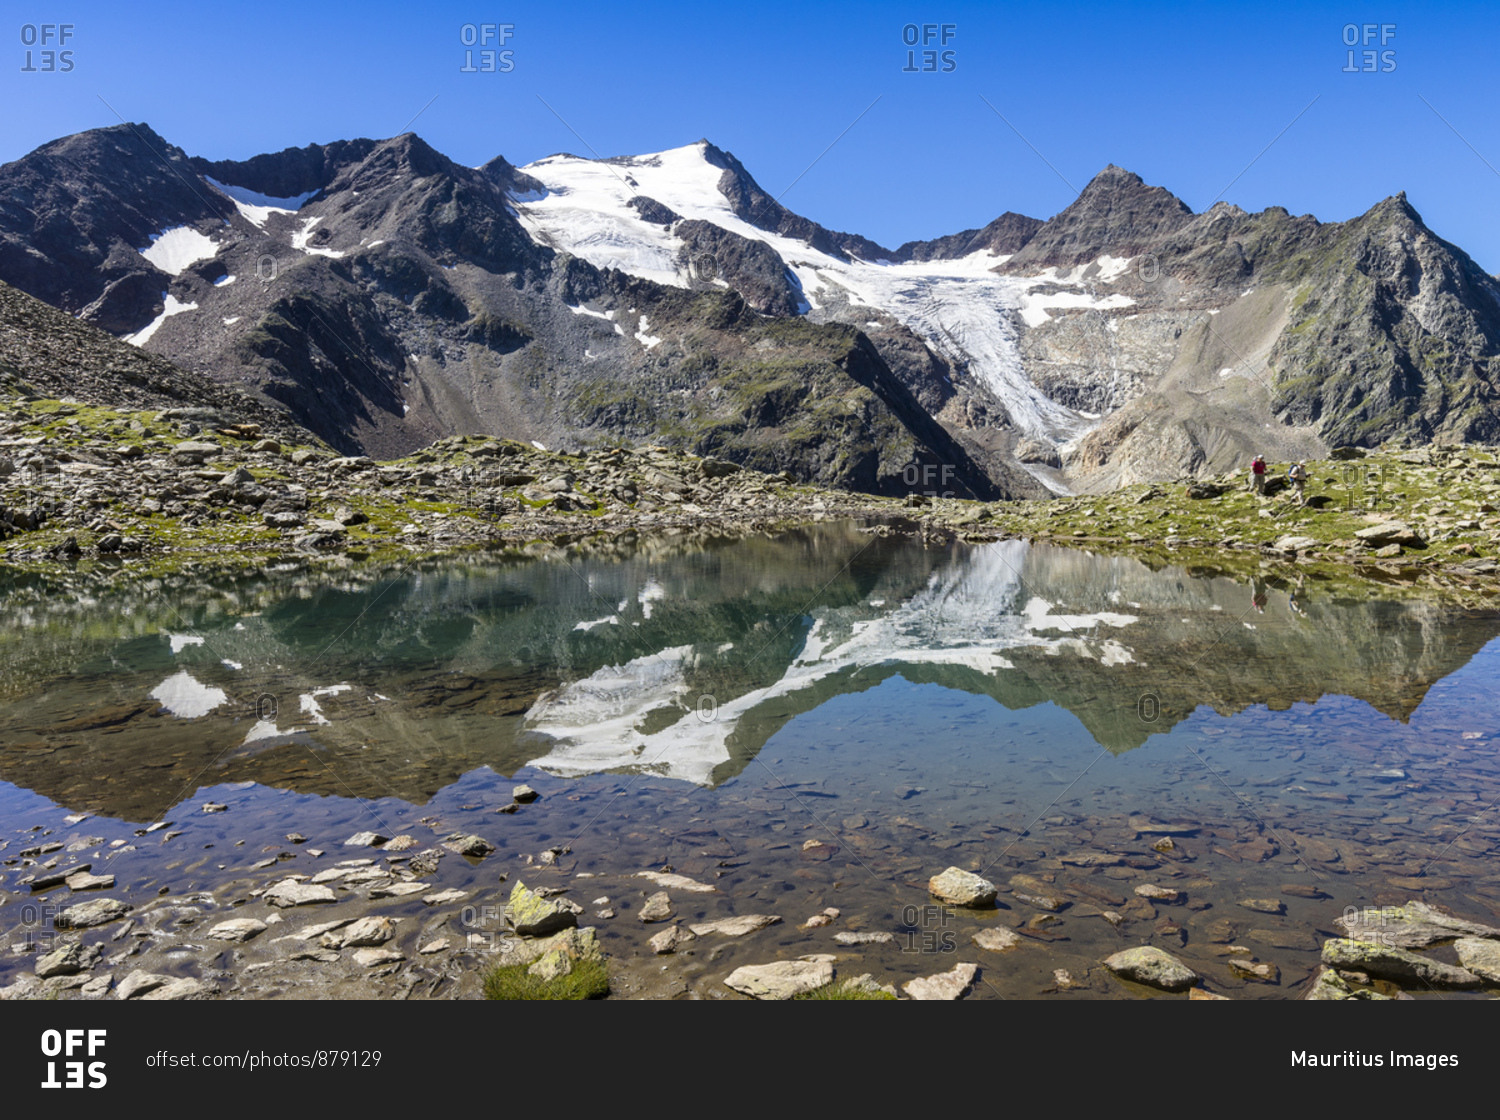 Austria, tyrol, the stubai alps, neustift, mirroring of the wilde freigers in a small lake with passing hikers